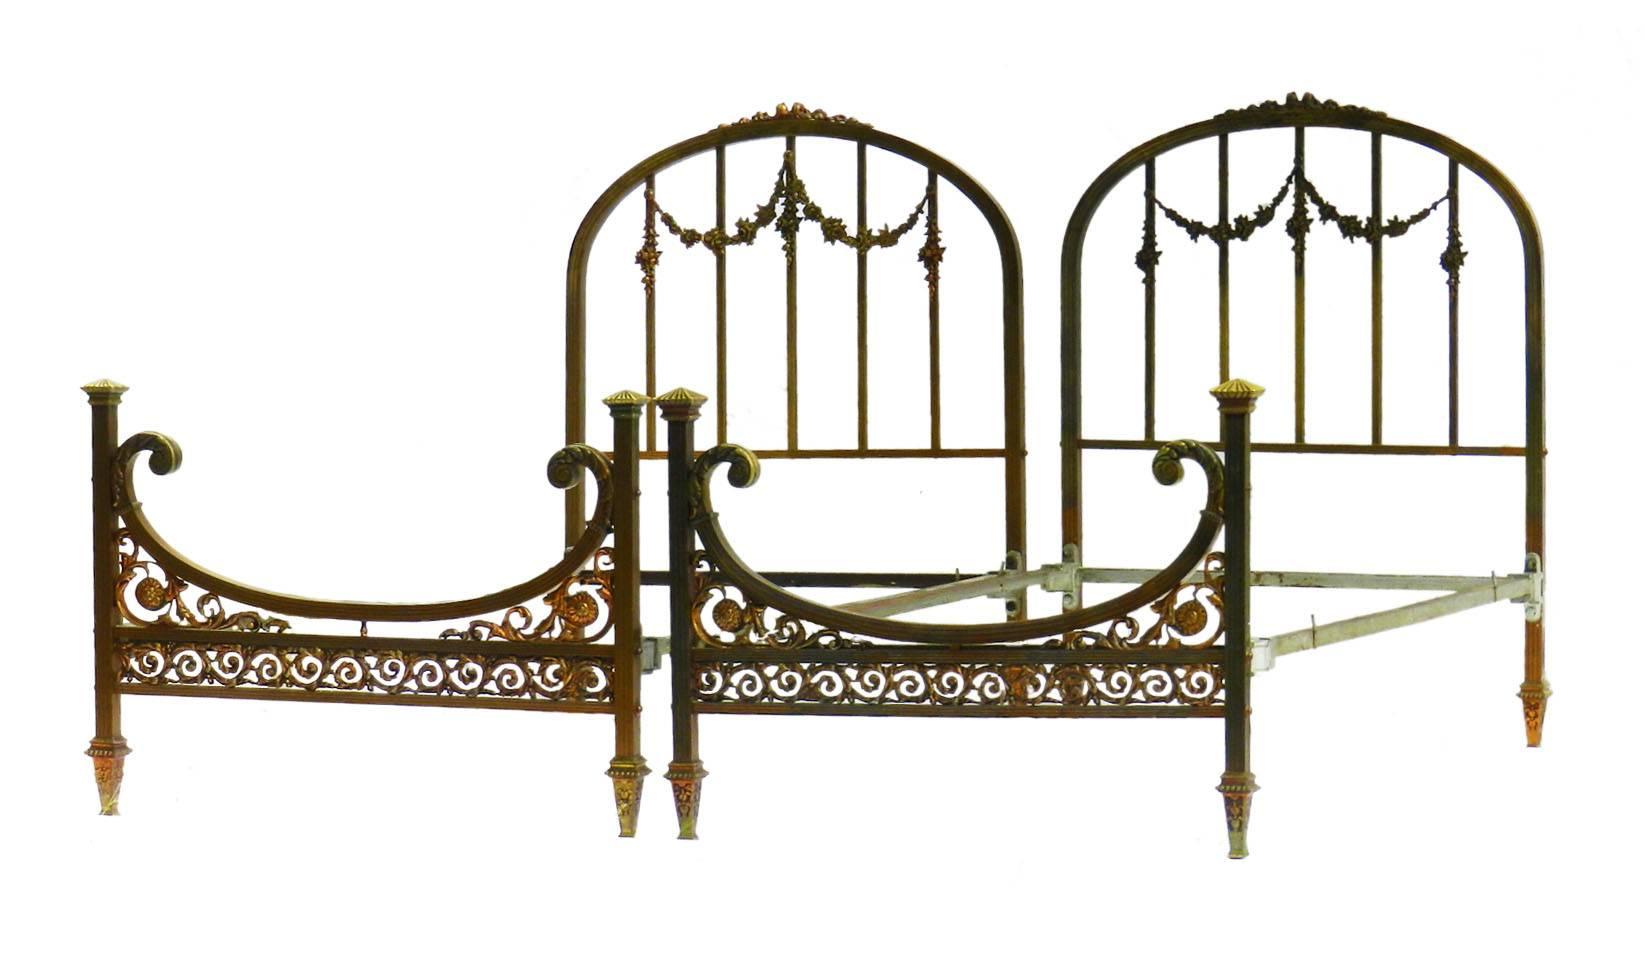 Rare pair of French Twin Beds Belle Époque 
Pair of twin singles
Very unusual bronze, iron and brass
Floral swags
Sound and solid with wonderful patina
These beds will take 3 foot wide mattresses and bases (slats or shallow box spring), we can